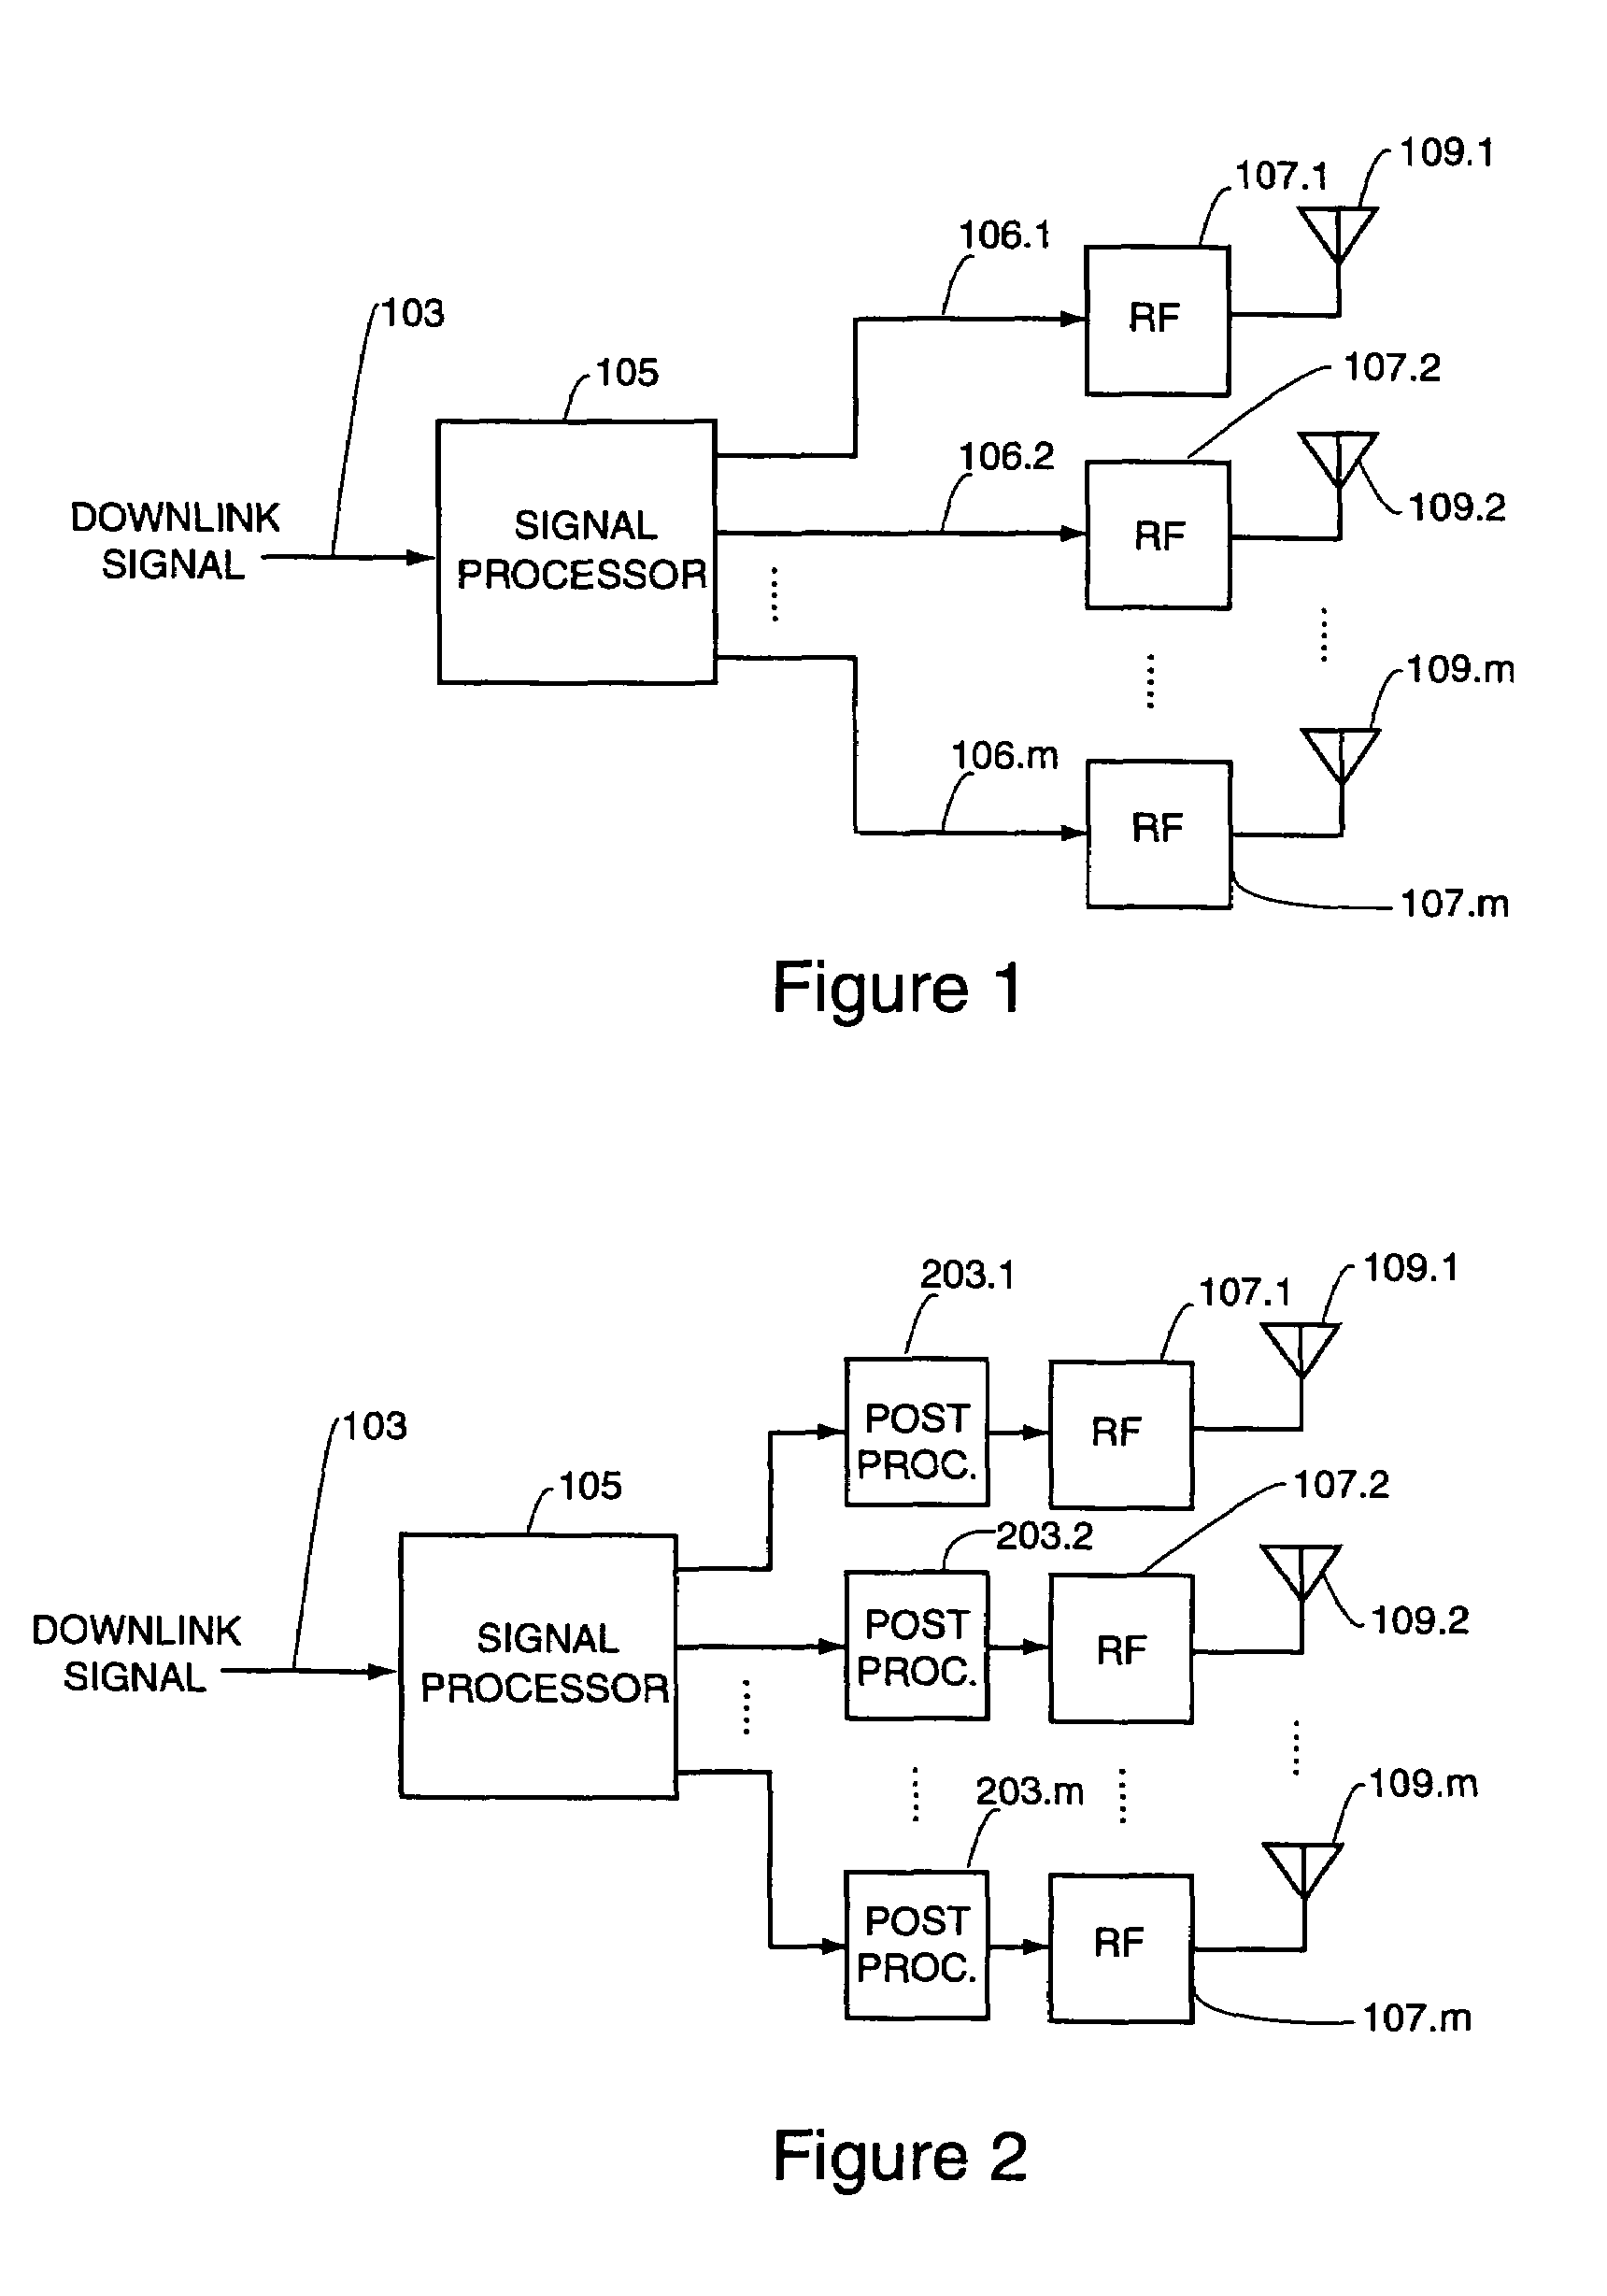 Downlink broadcasting by sequential transmissions from a communication station having an antenna array